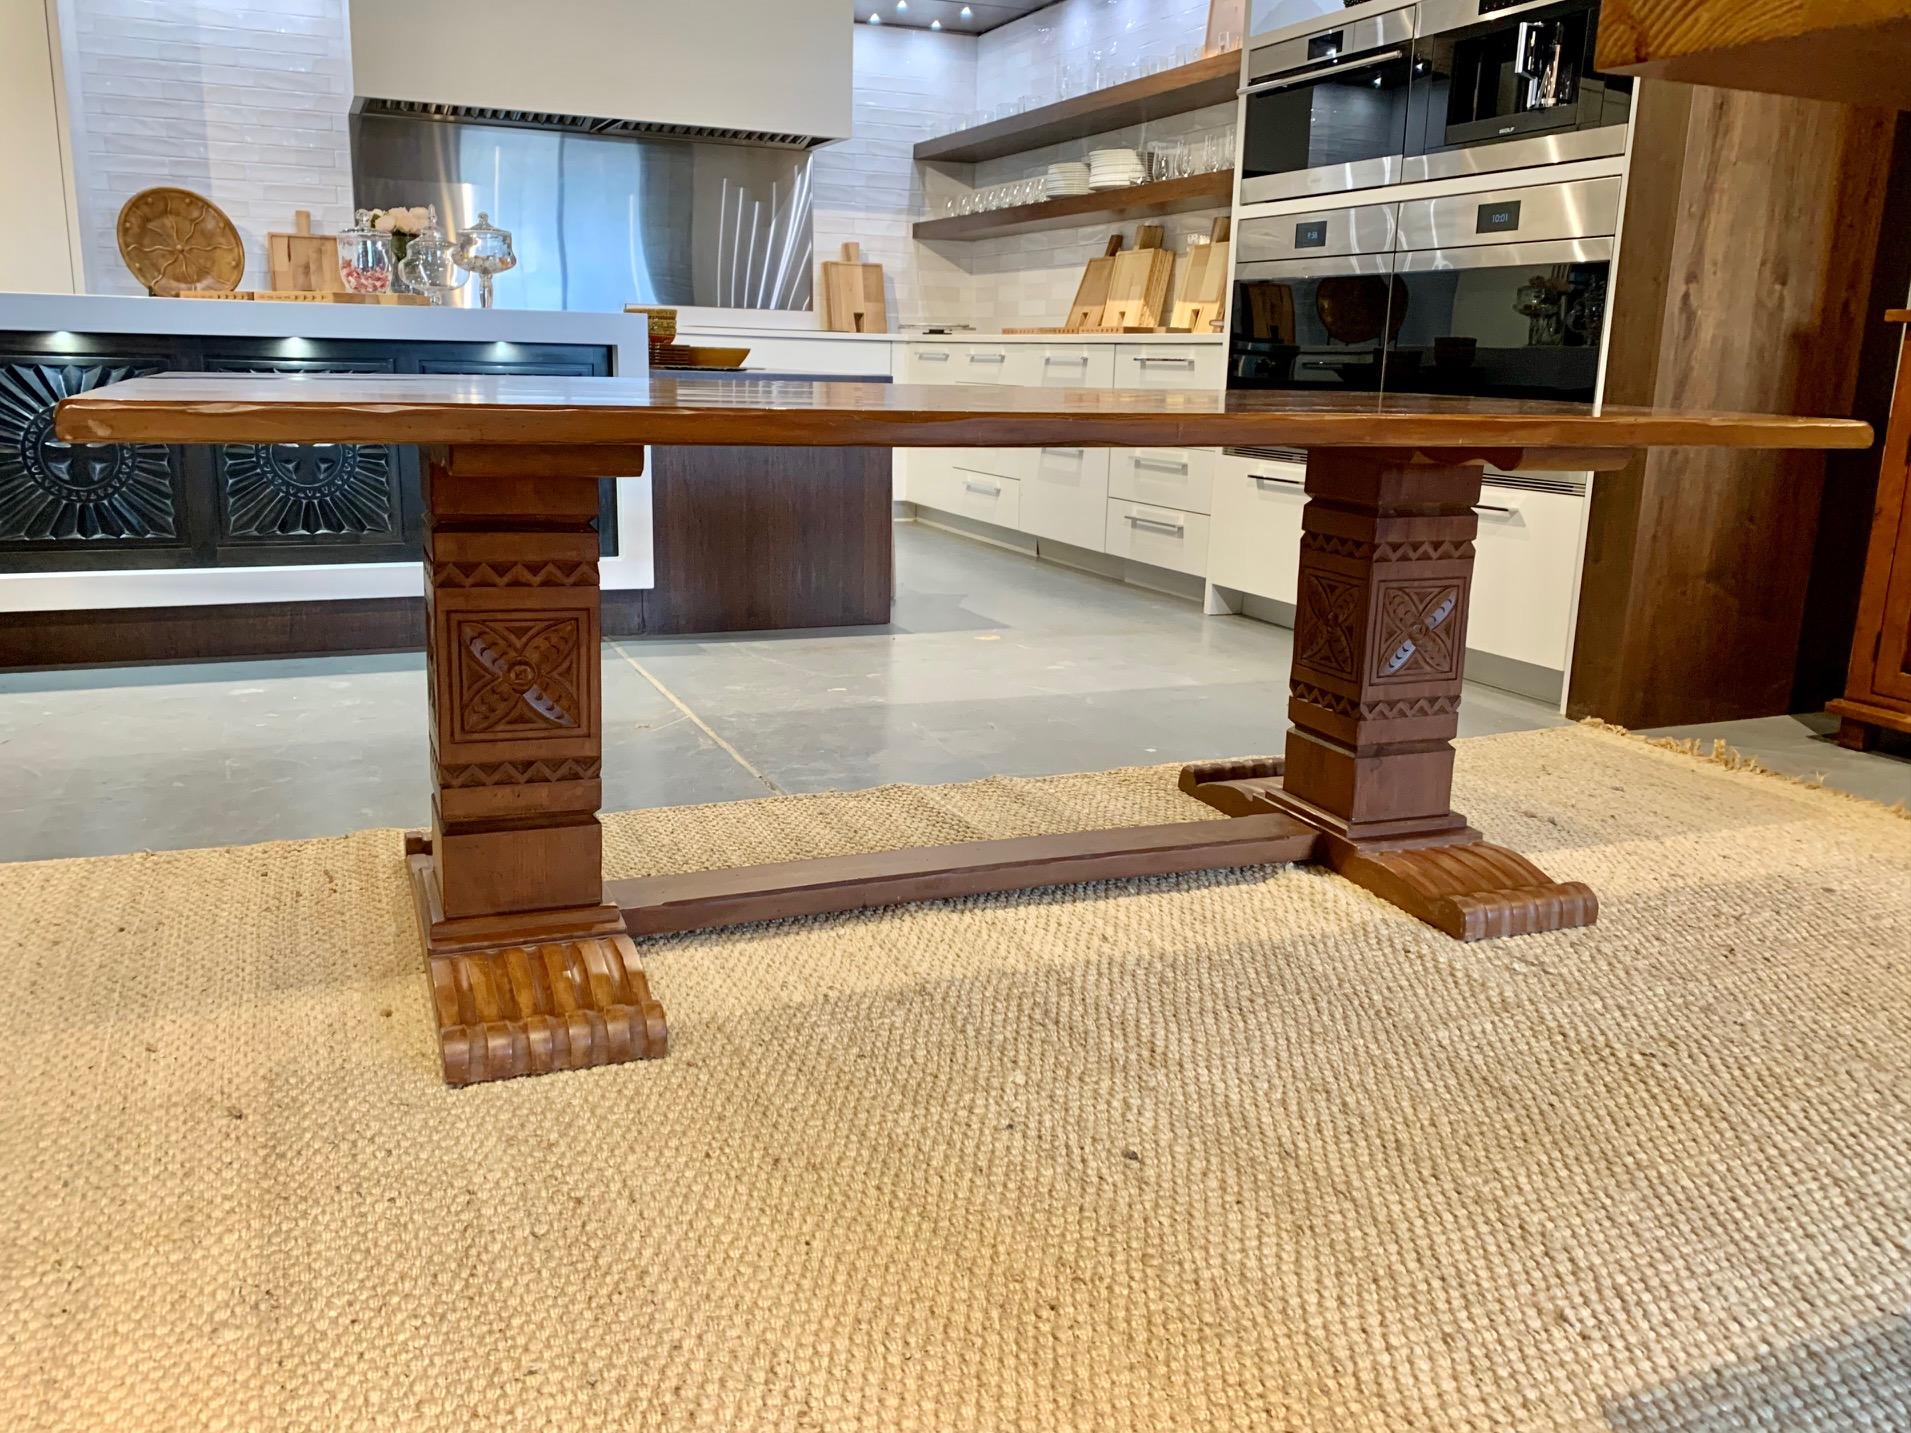 This beautiful hand carved table is hand crafted by skilled scraftsmen and women in our New Mexico factory.
A showroom piece that shows some use but in perfect condition.
This 90